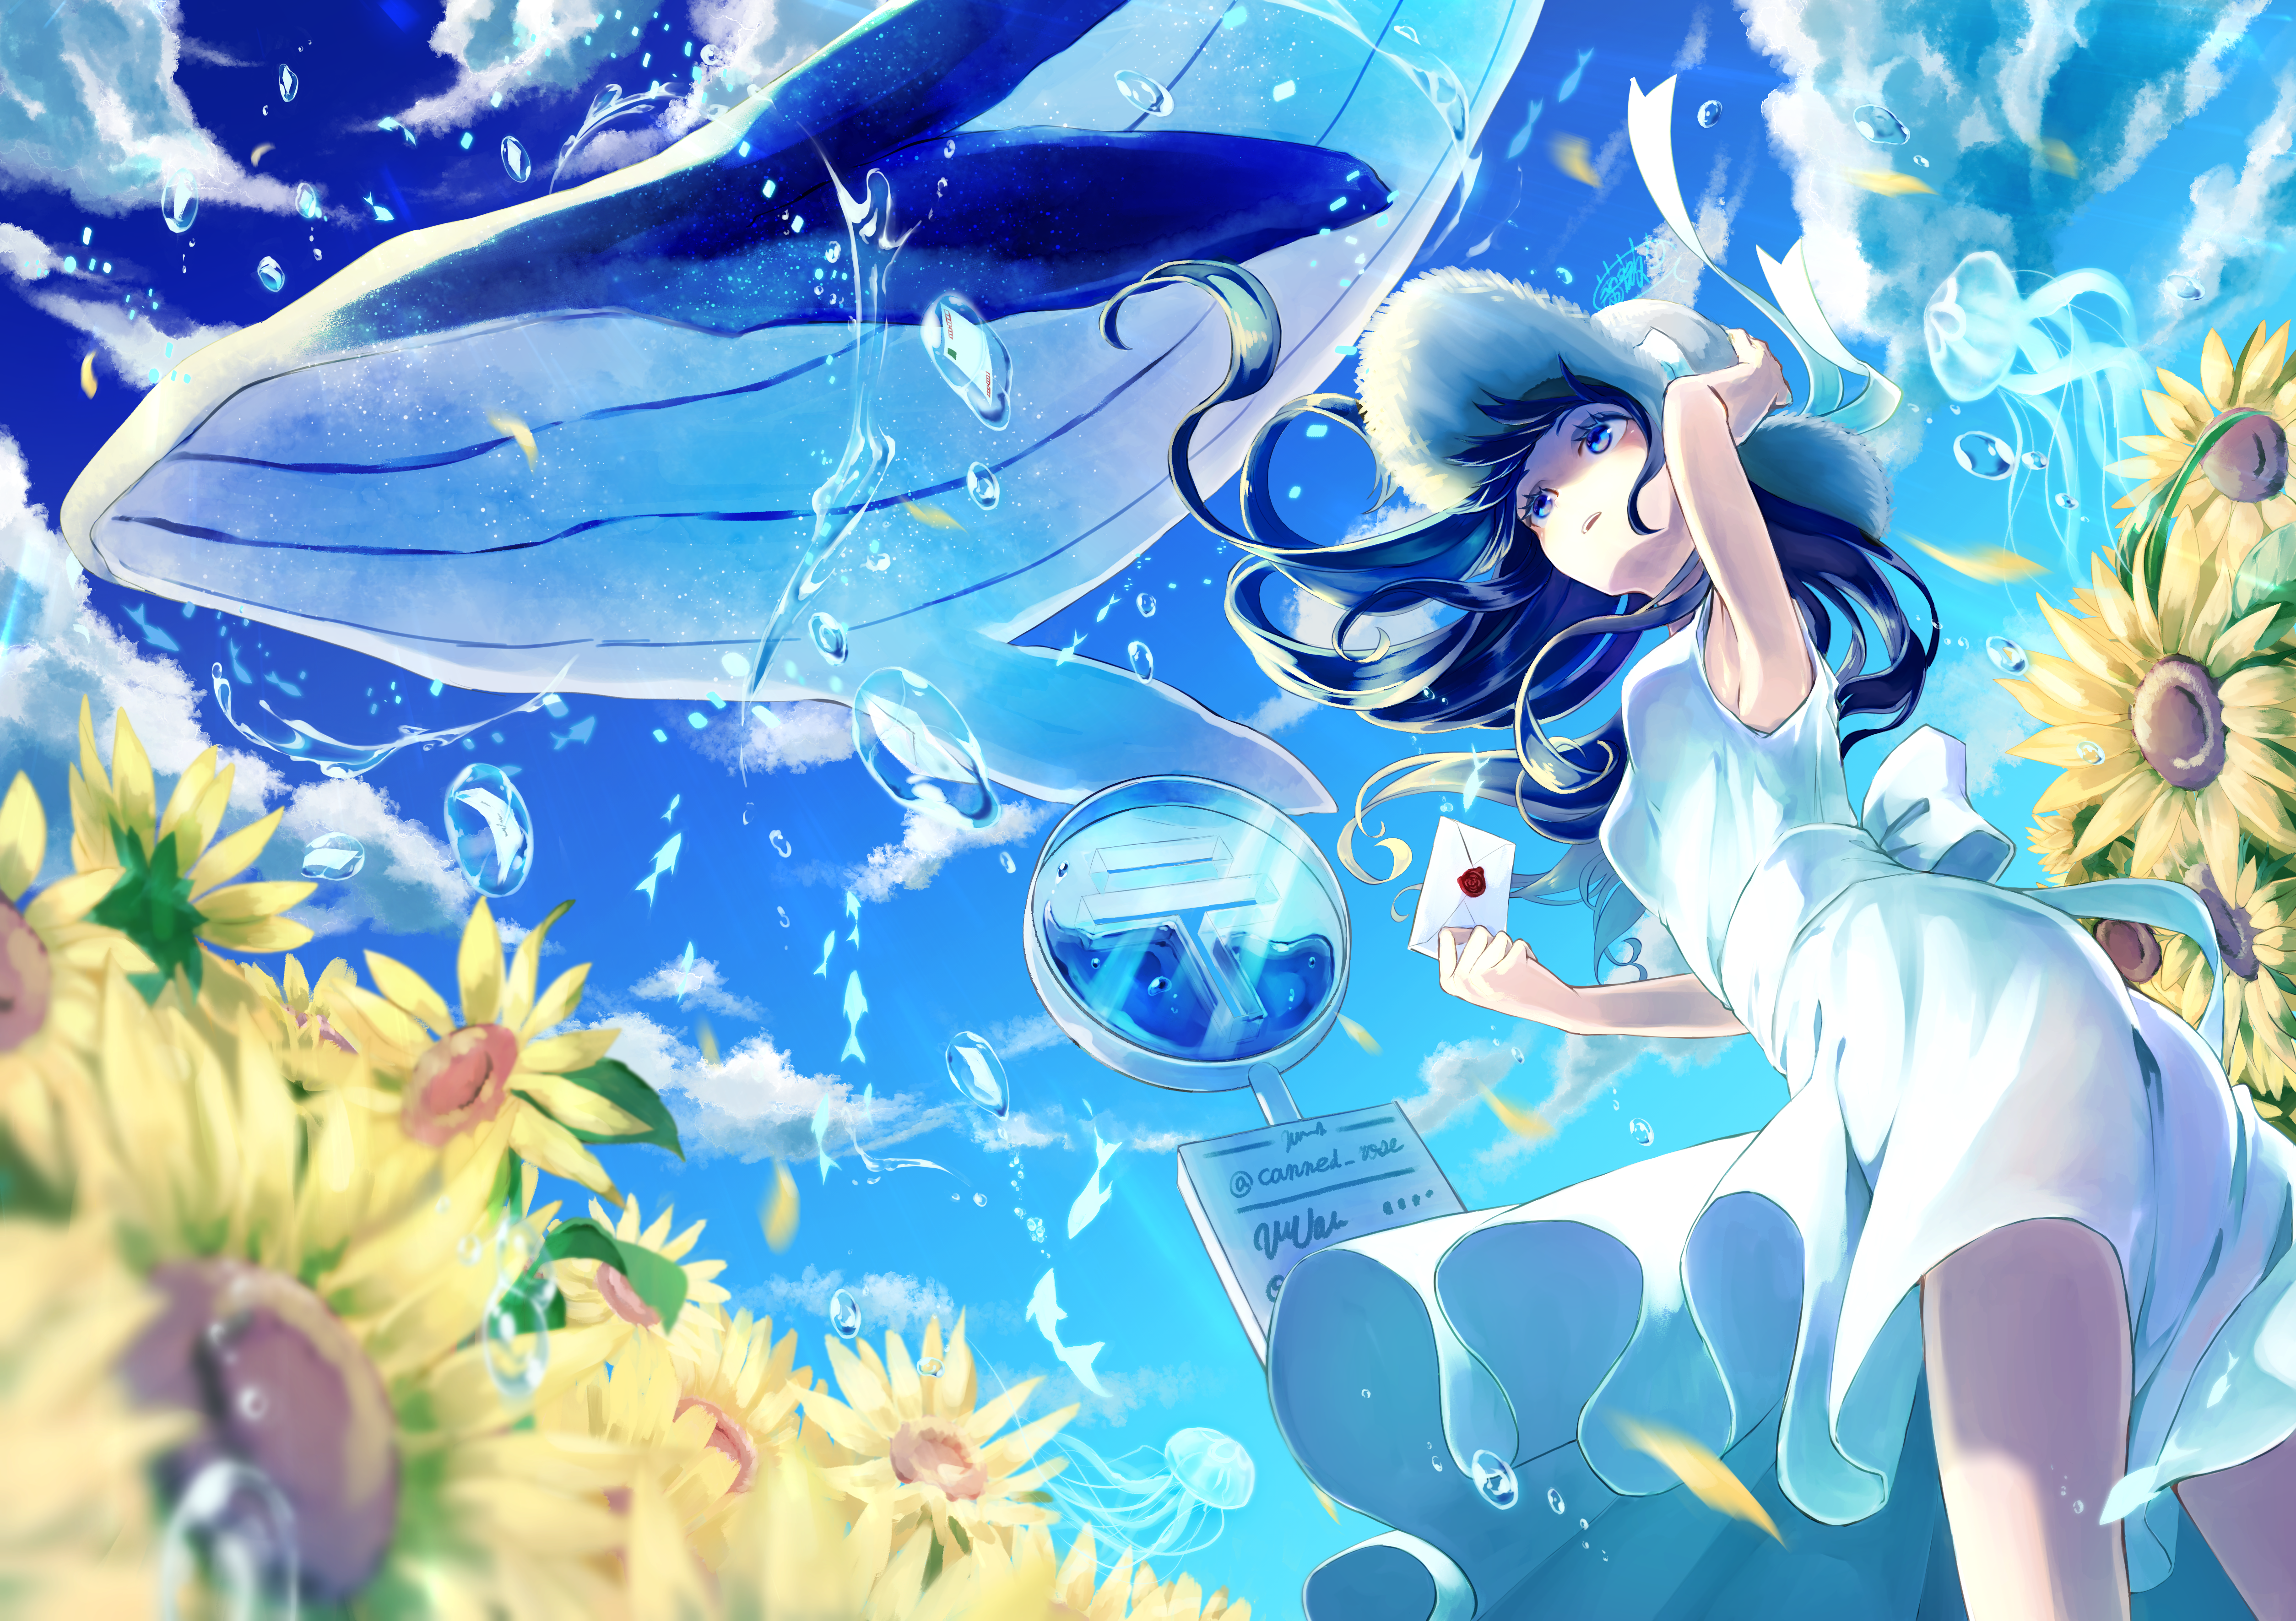 Anime 5016x3541 anime girls anime looking up whale flying whales clouds sky wind dress sunflowers long hair letter water drops animals standing leaves petals hat sun hats blue eyes hair blowing in the wind sign canned rose